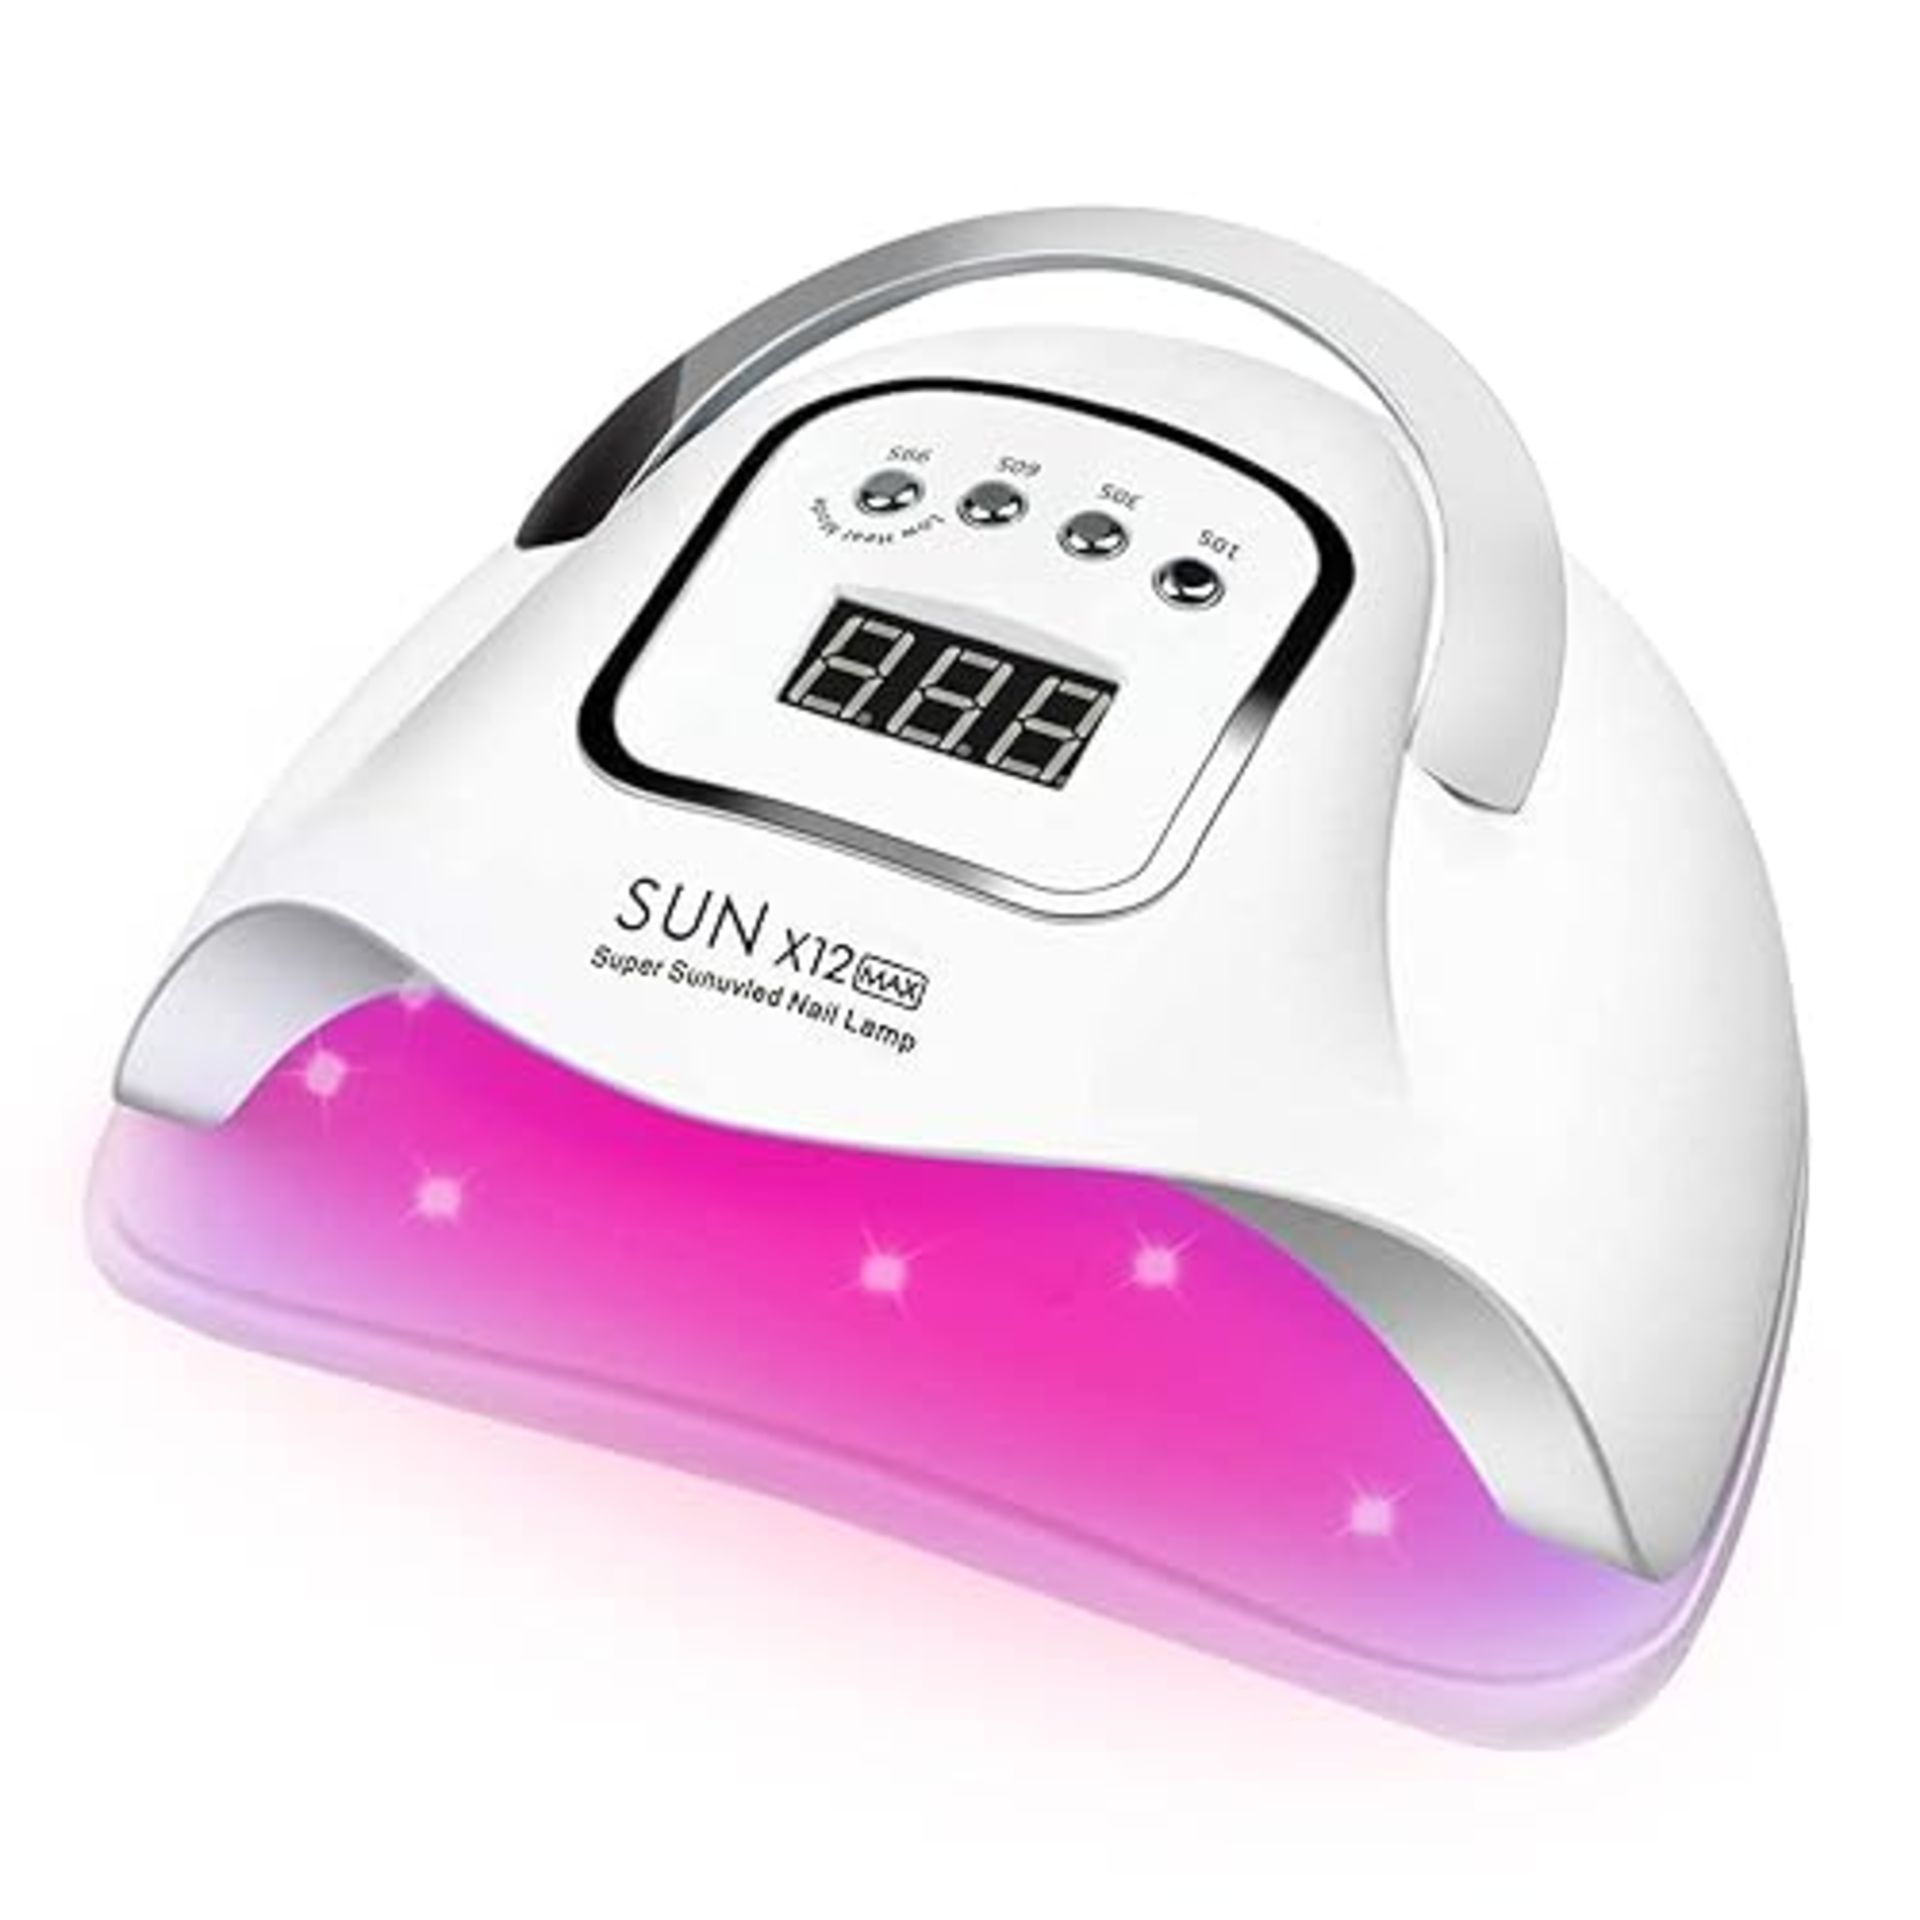 BEENLE Upgraded UV LED Nail Lamp, 280W Fast Nail Dryer Nail Curing Light with 66 Led Beads, Portabl